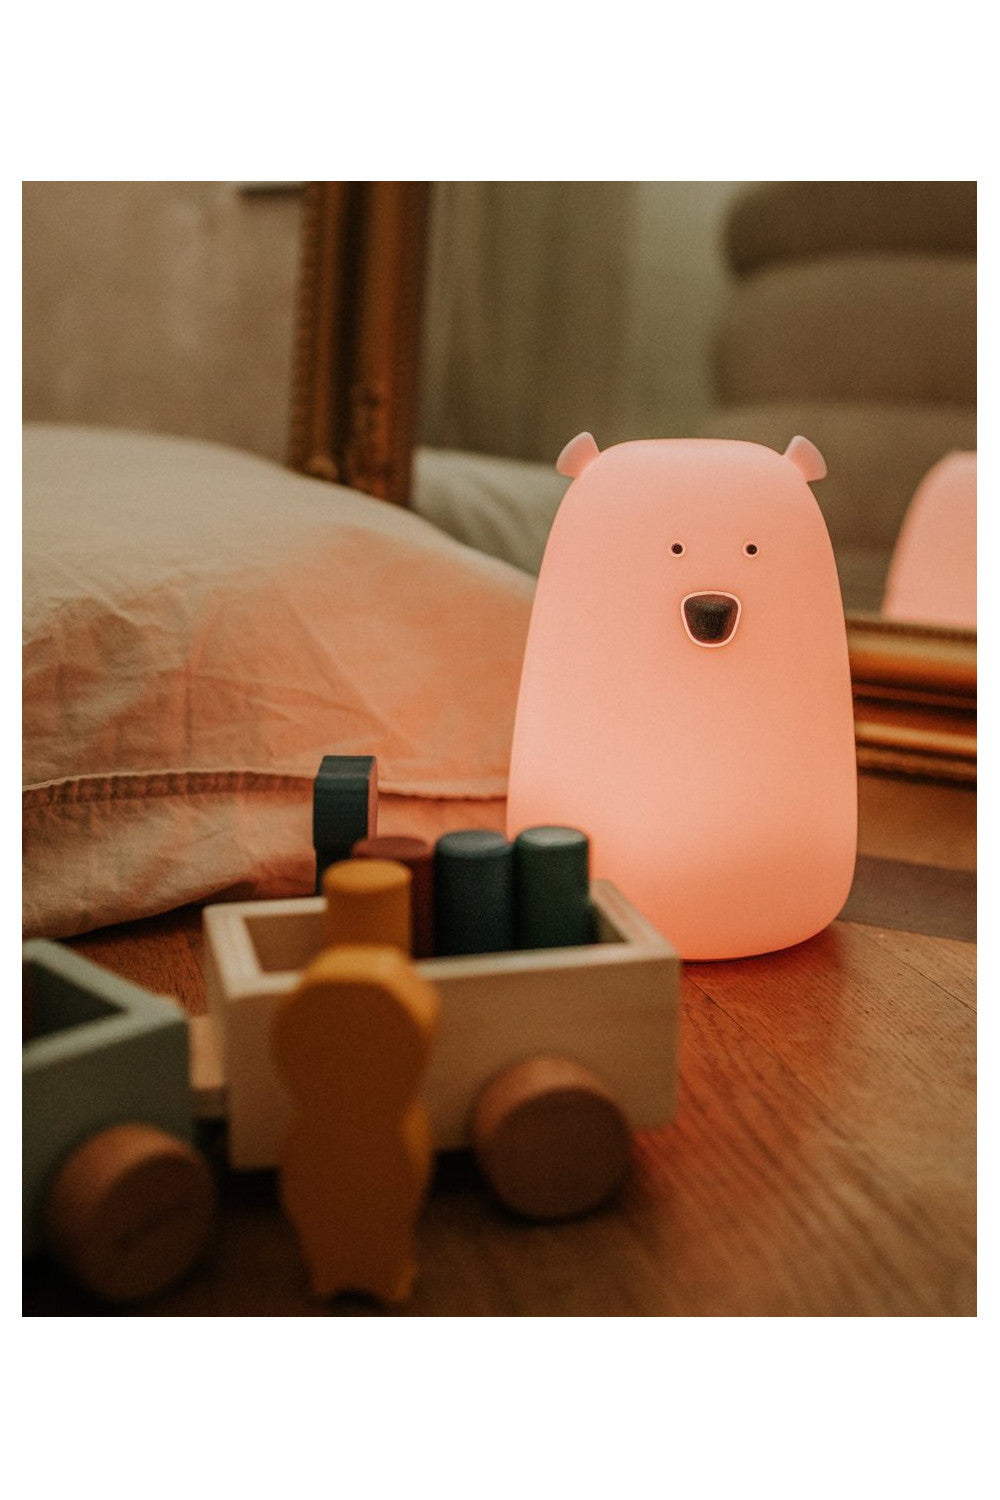 A charming Big Bear silicone lamp by Rabbit & Friends, featuring a teddy bear shape with small ears, black eyes, and nose. Soft, touch-responsive, and portable for bedtime routines.